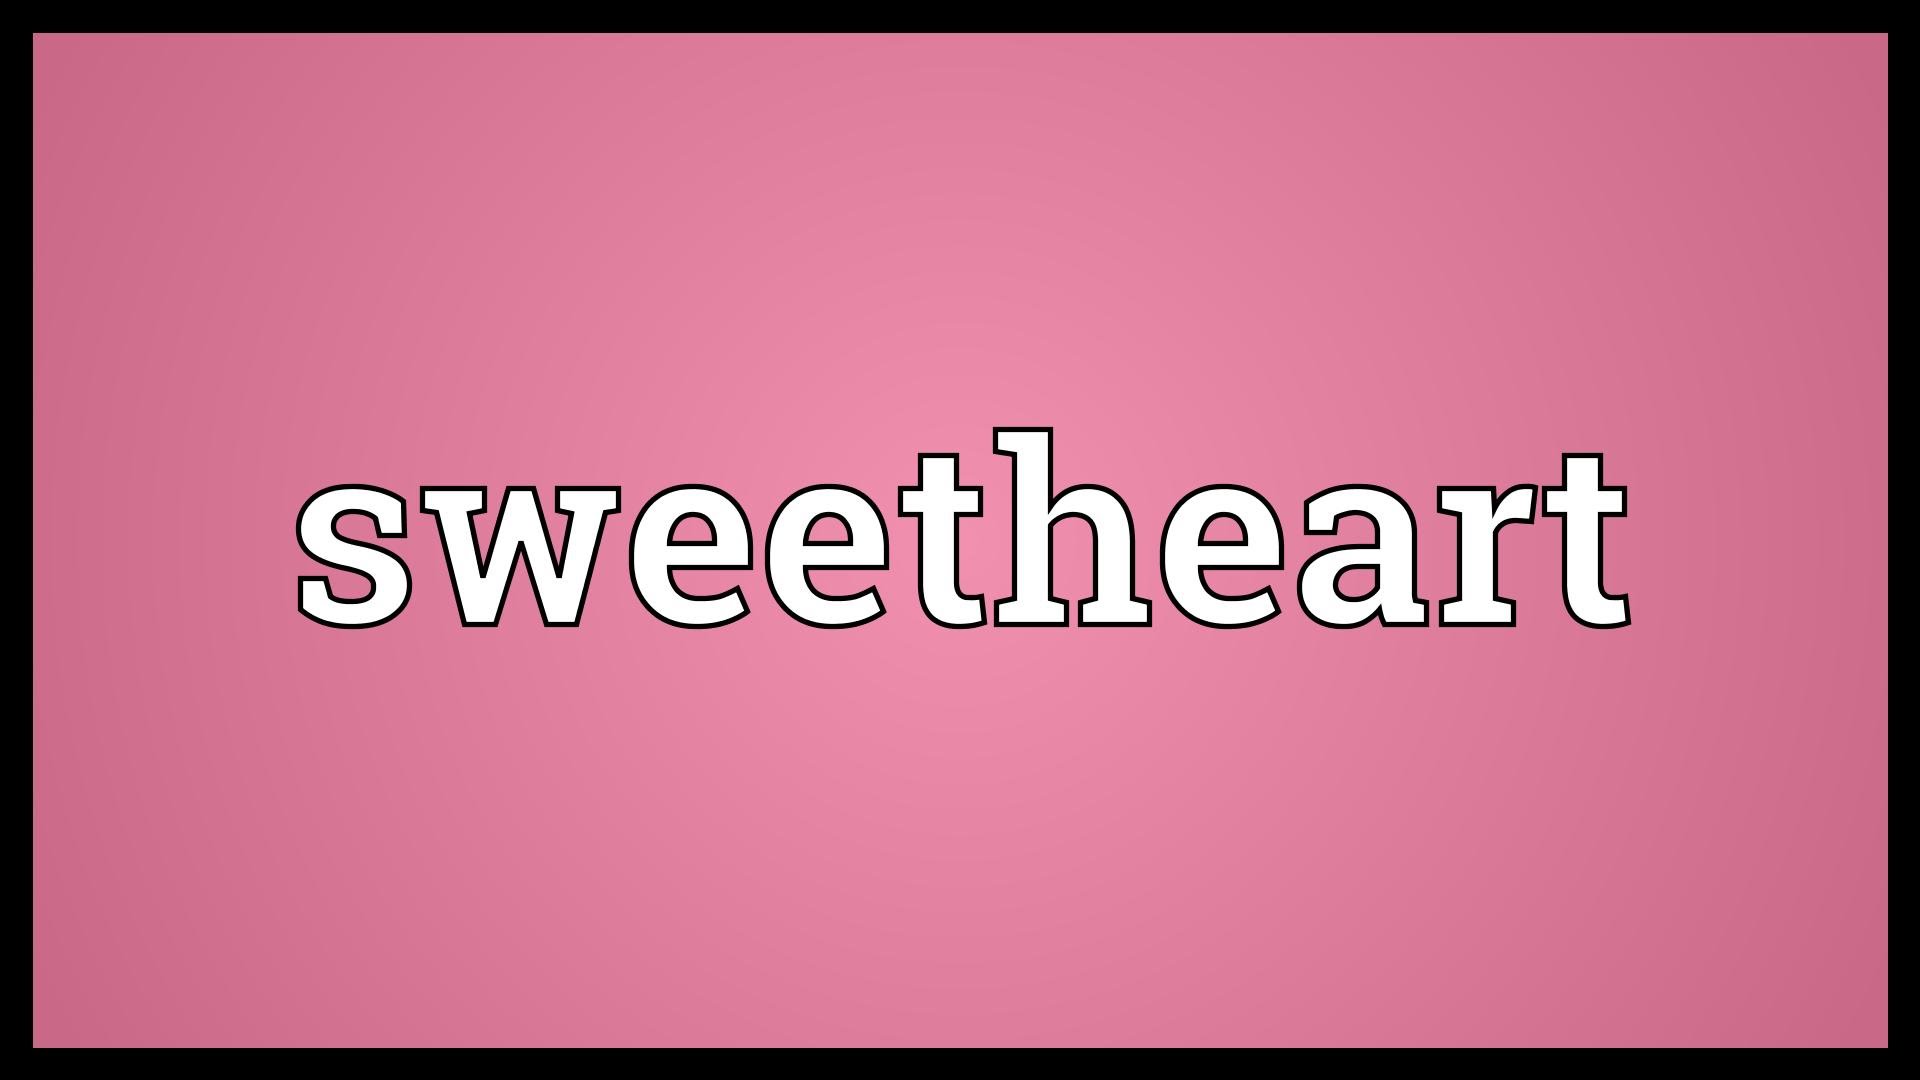 Sweetheart Meaning - YouTube